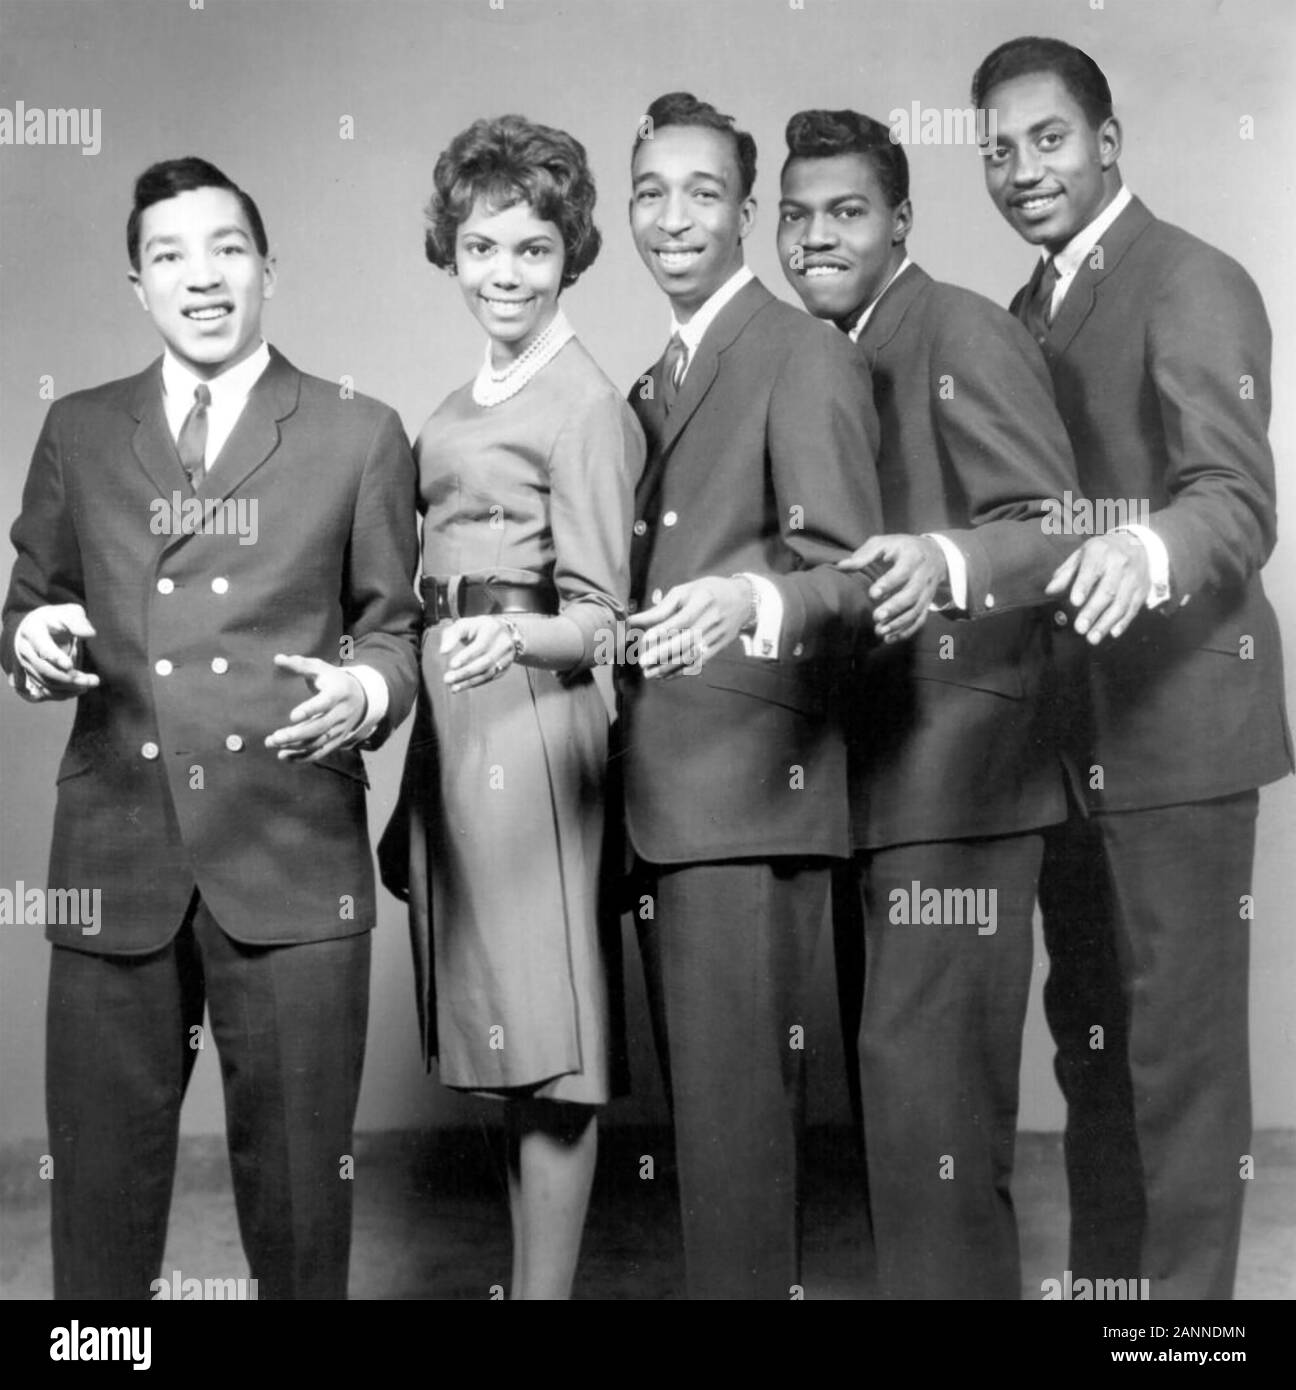 THE MIRACLES Promotional photo of American R&B group about 1962. From left: Smokey Robinson, Claudette Robinson,Ronald White, Pete Moore, Bobby Rogers. Stock Photo